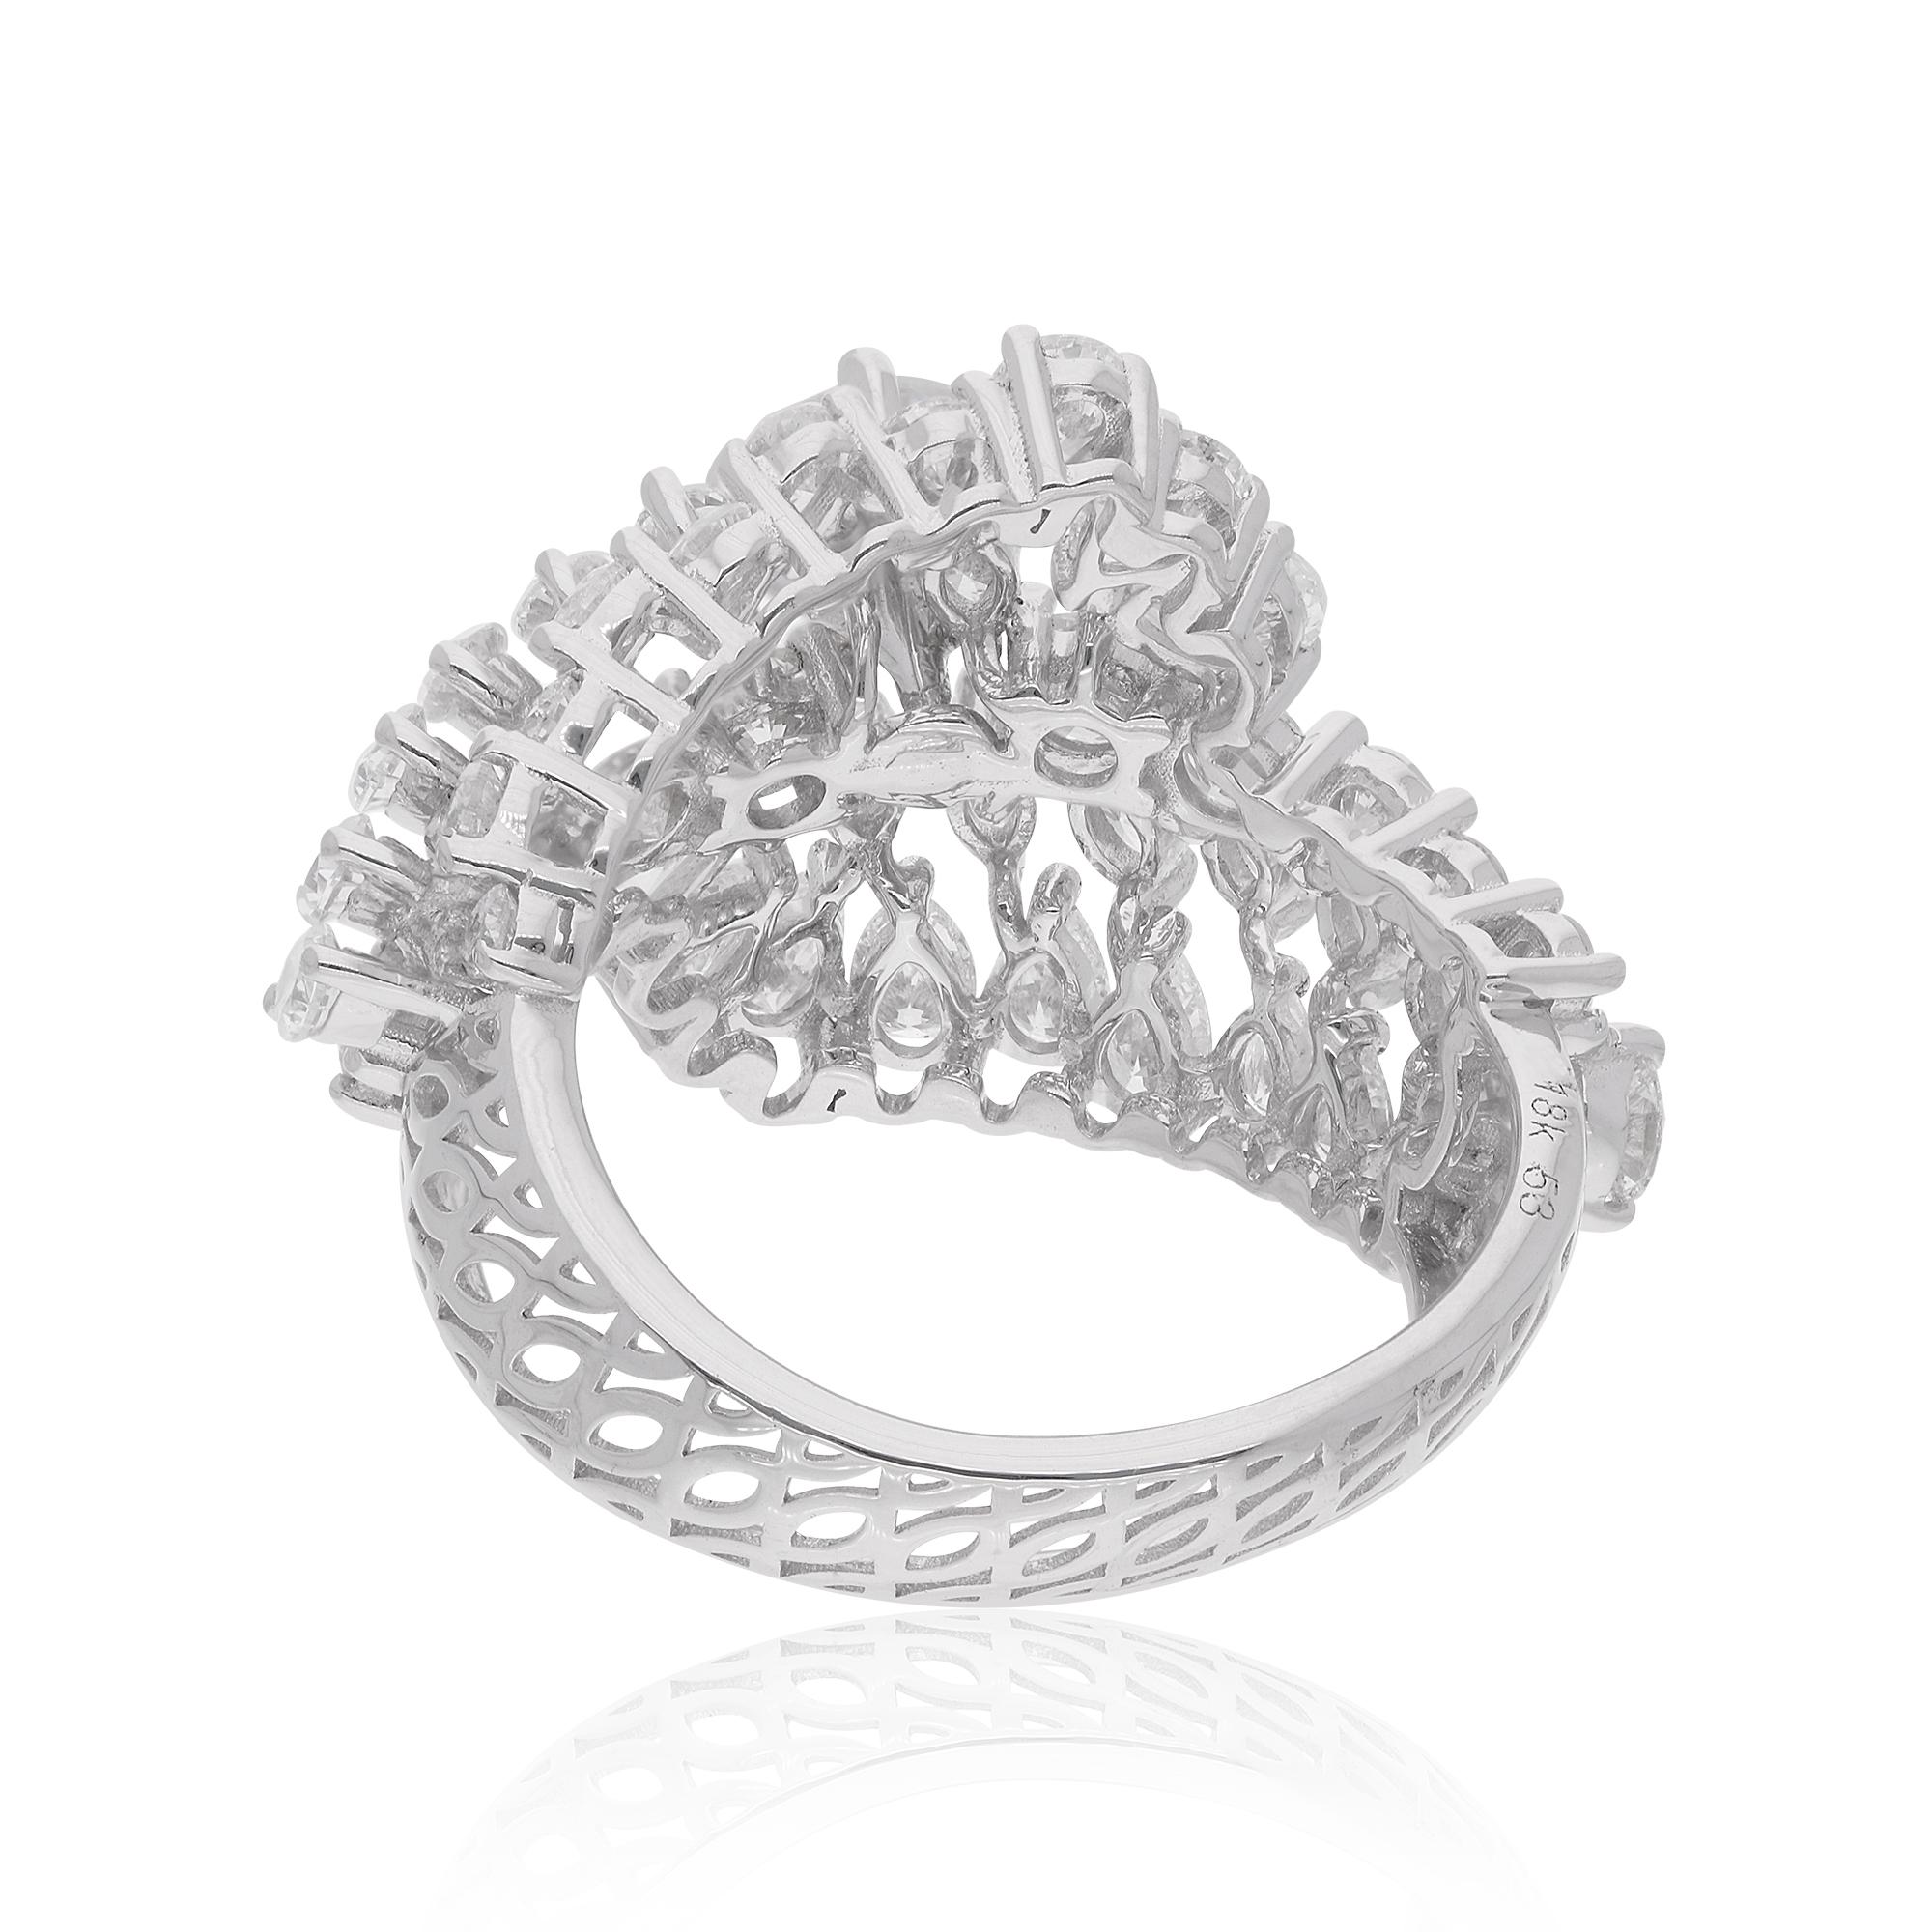 Crafted with meticulous attention to detail, the diamonds are set in a wrap-around design that elegantly encircles your finger, creating a sense of modern elegance and refinement. The lustrous 14 Karat White Gold setting enhances the beauty of the